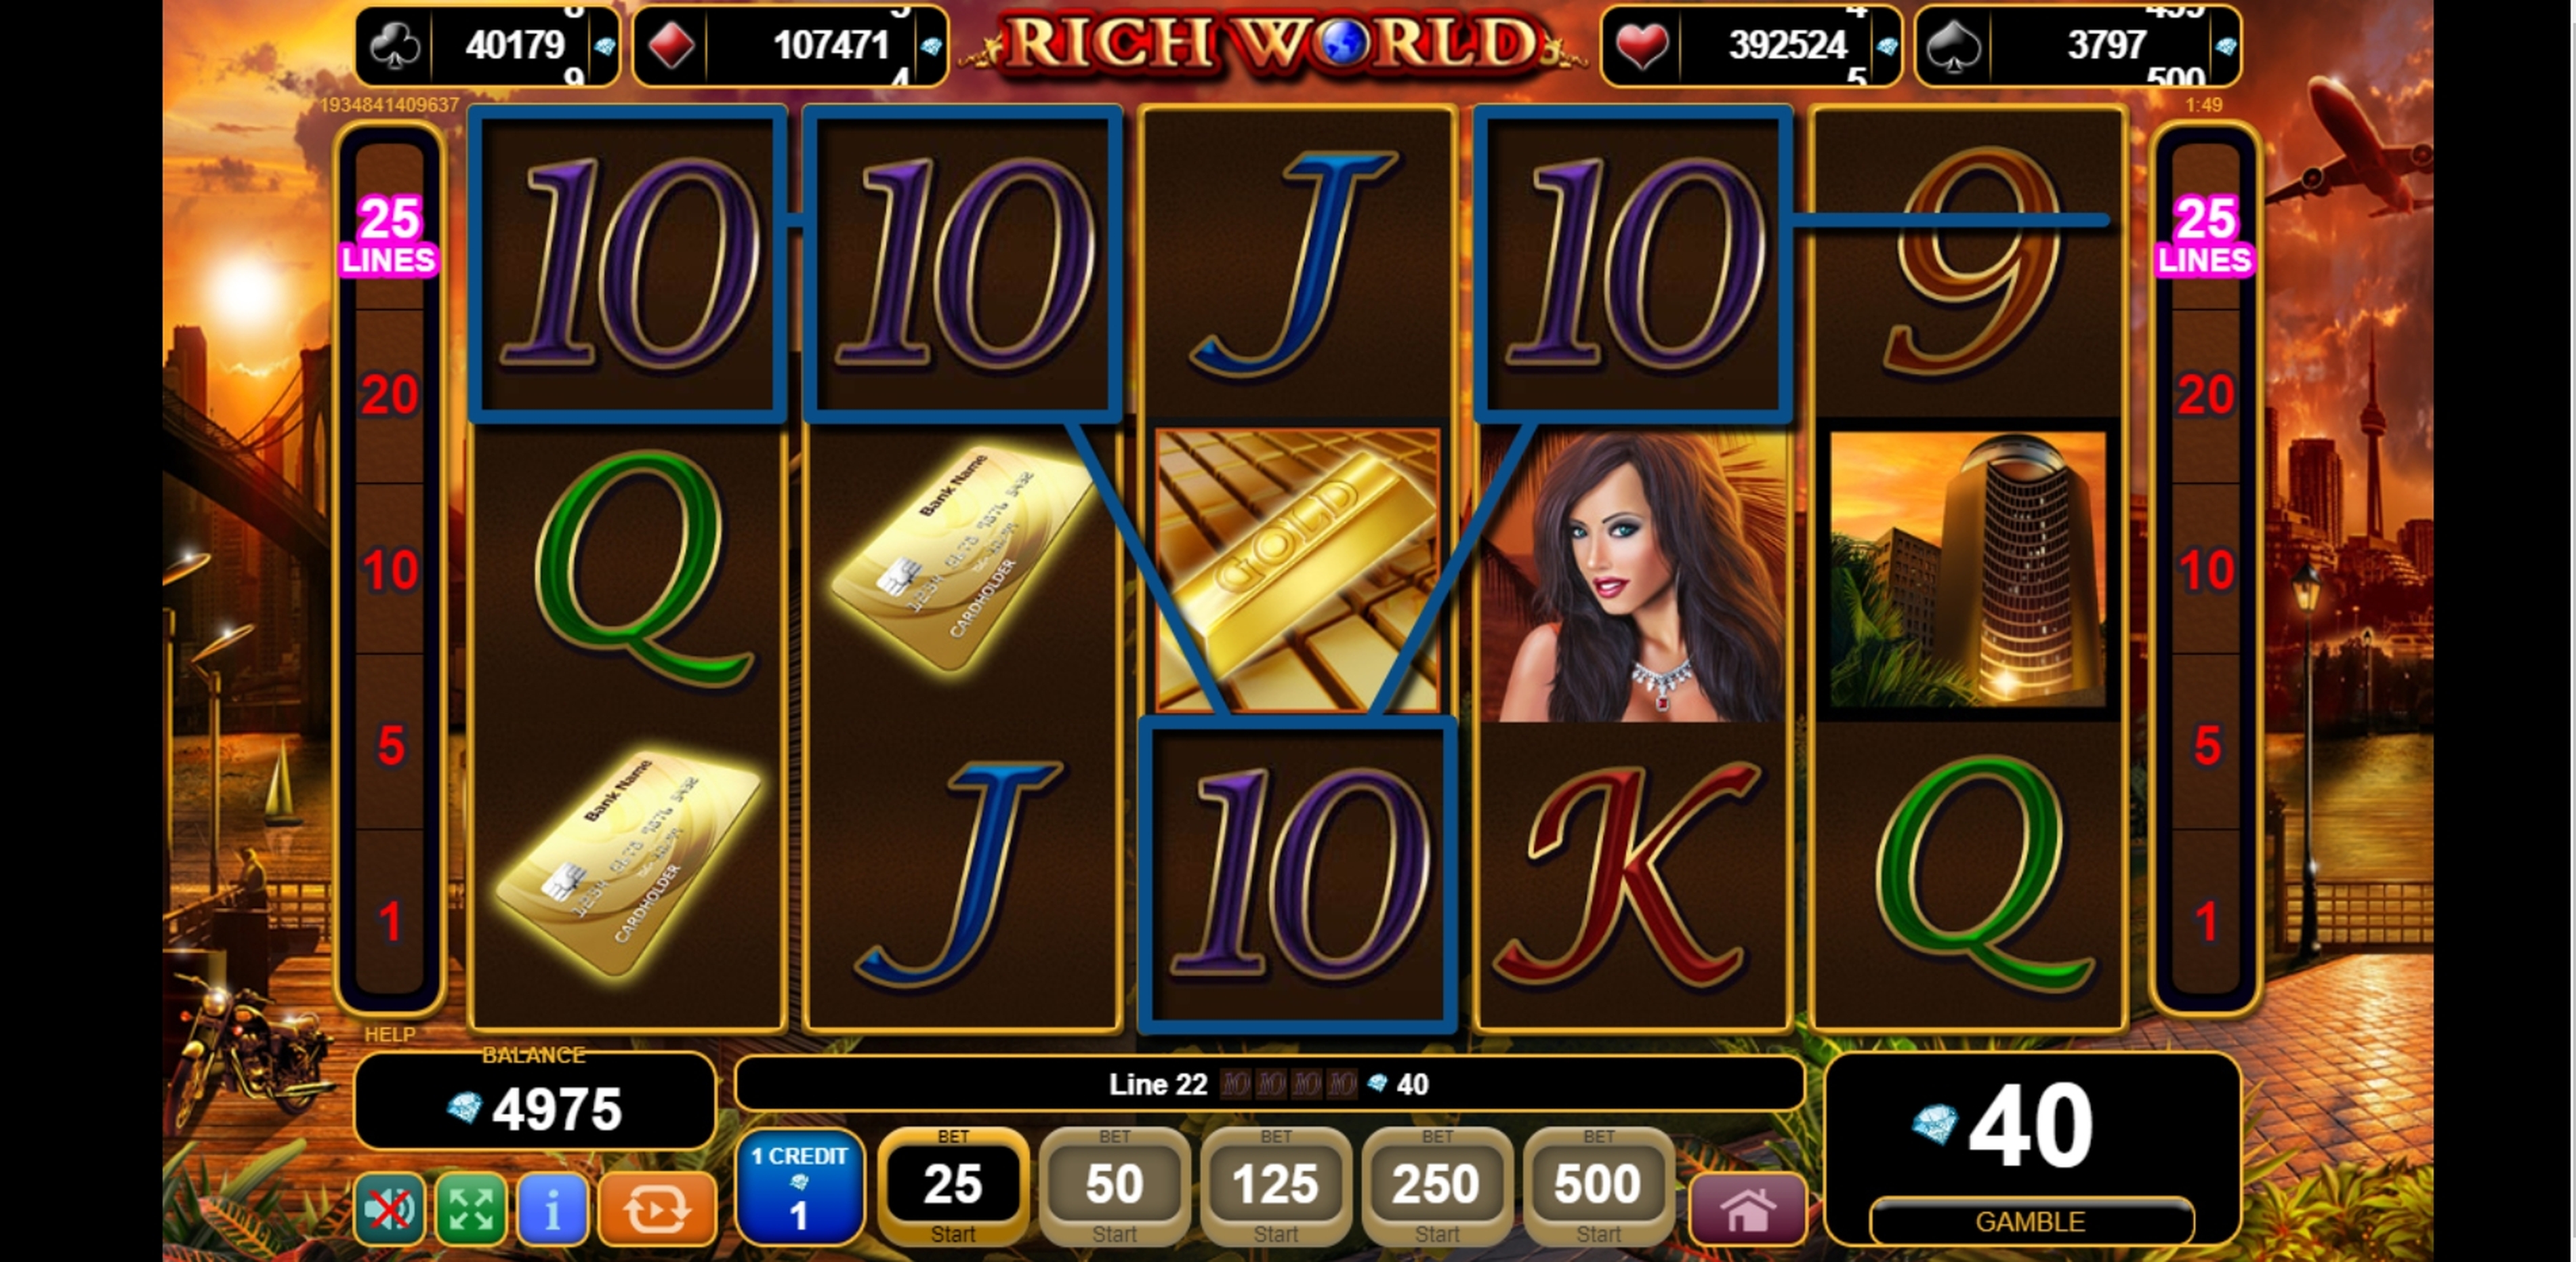 Win Money in Rich World Free Slot Game by EGT